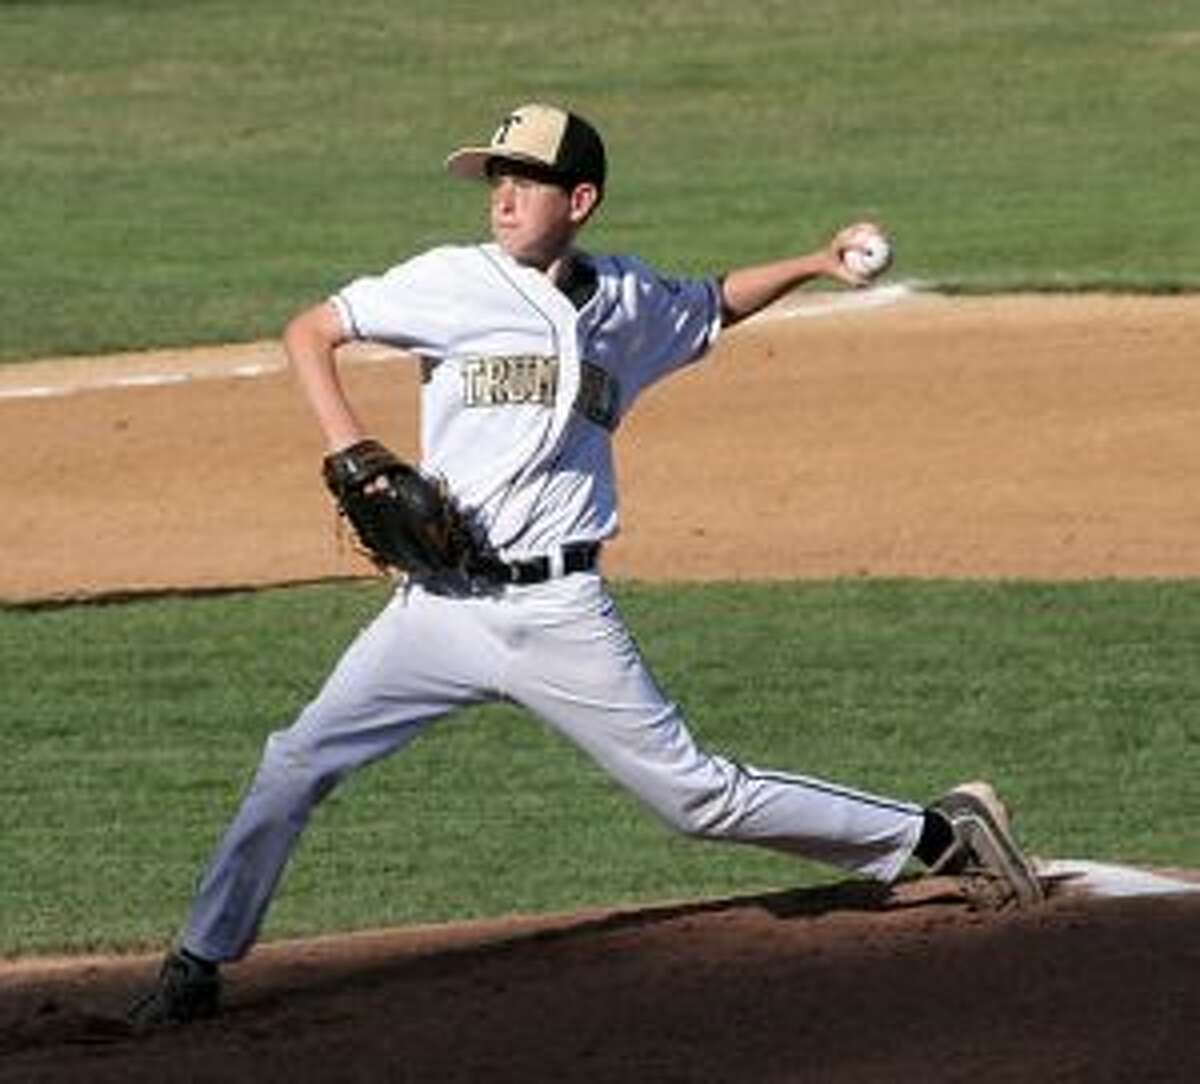 Ryan Carroll delivers a pitch in Trumbull U13's 7-1 win over Simsbury. — Bill Bloxsom photos